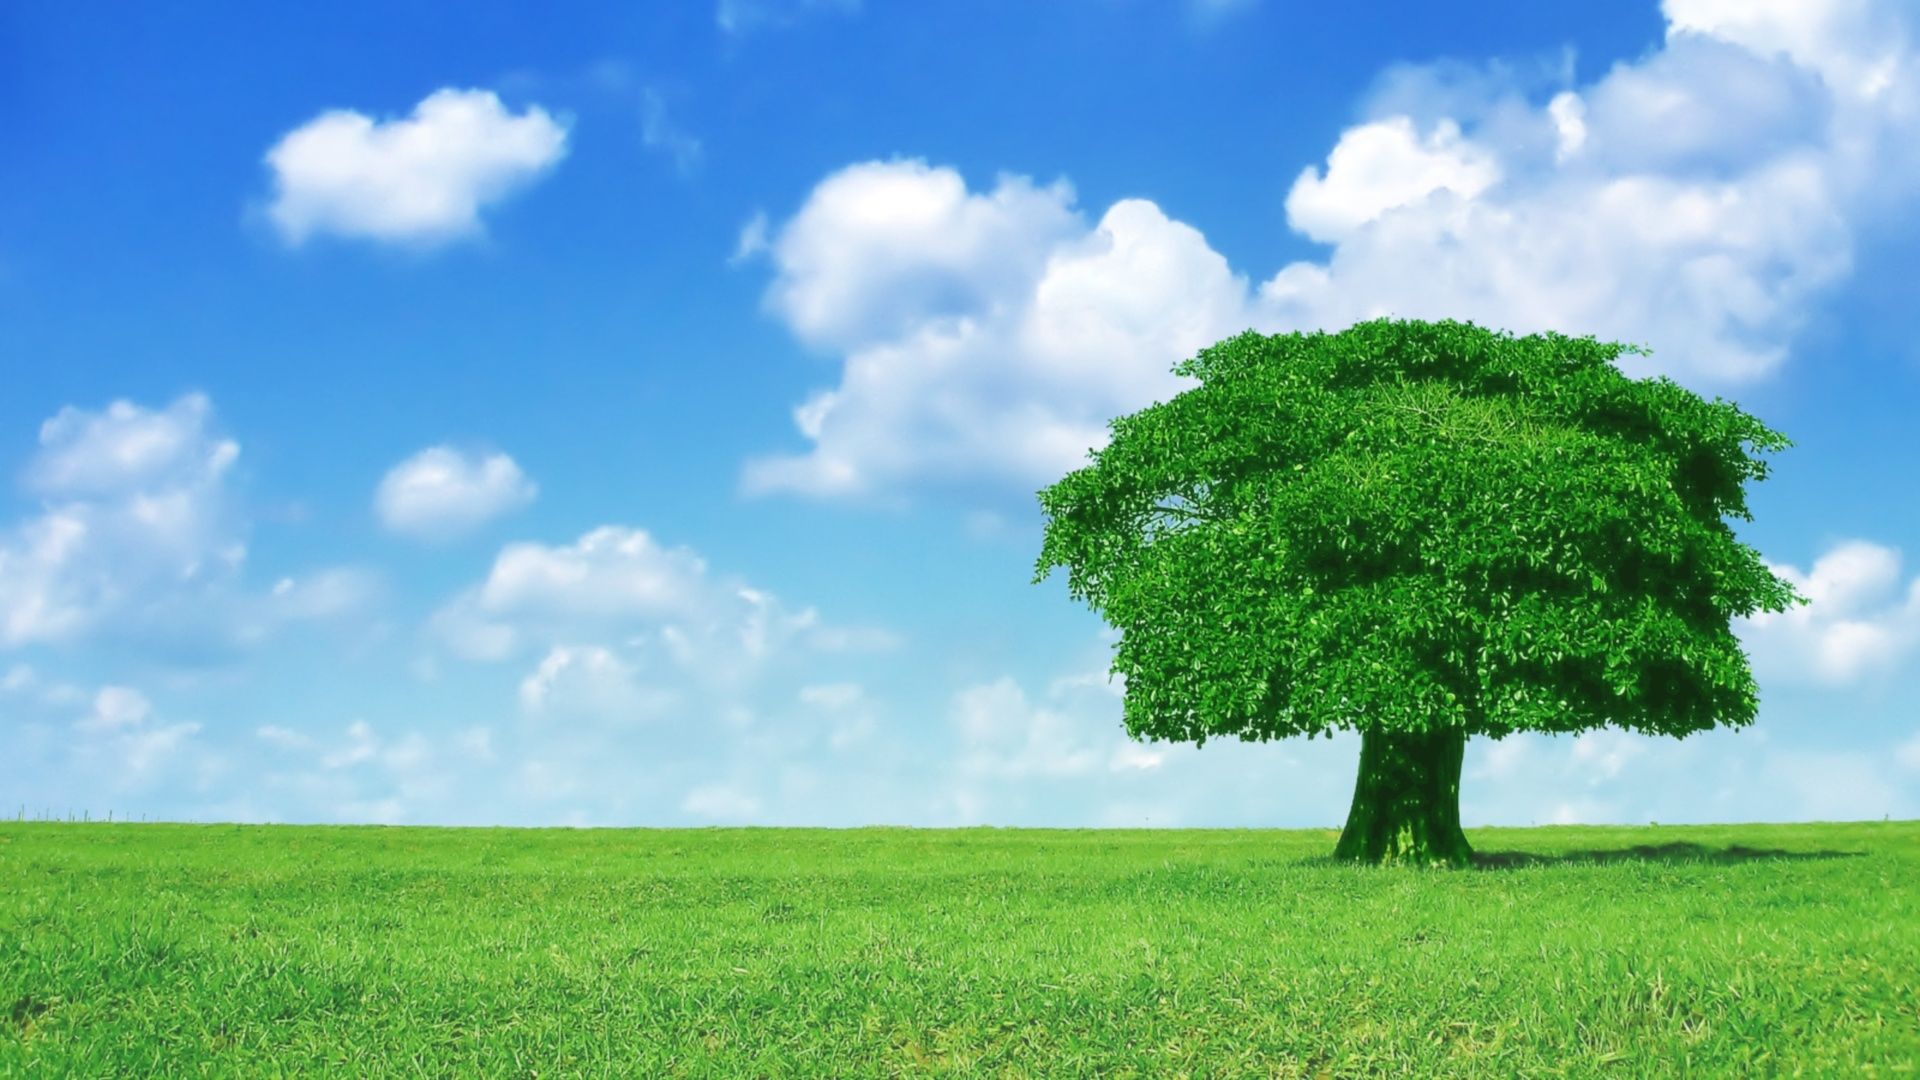 Free download download window xp cloud and tree wallpaper